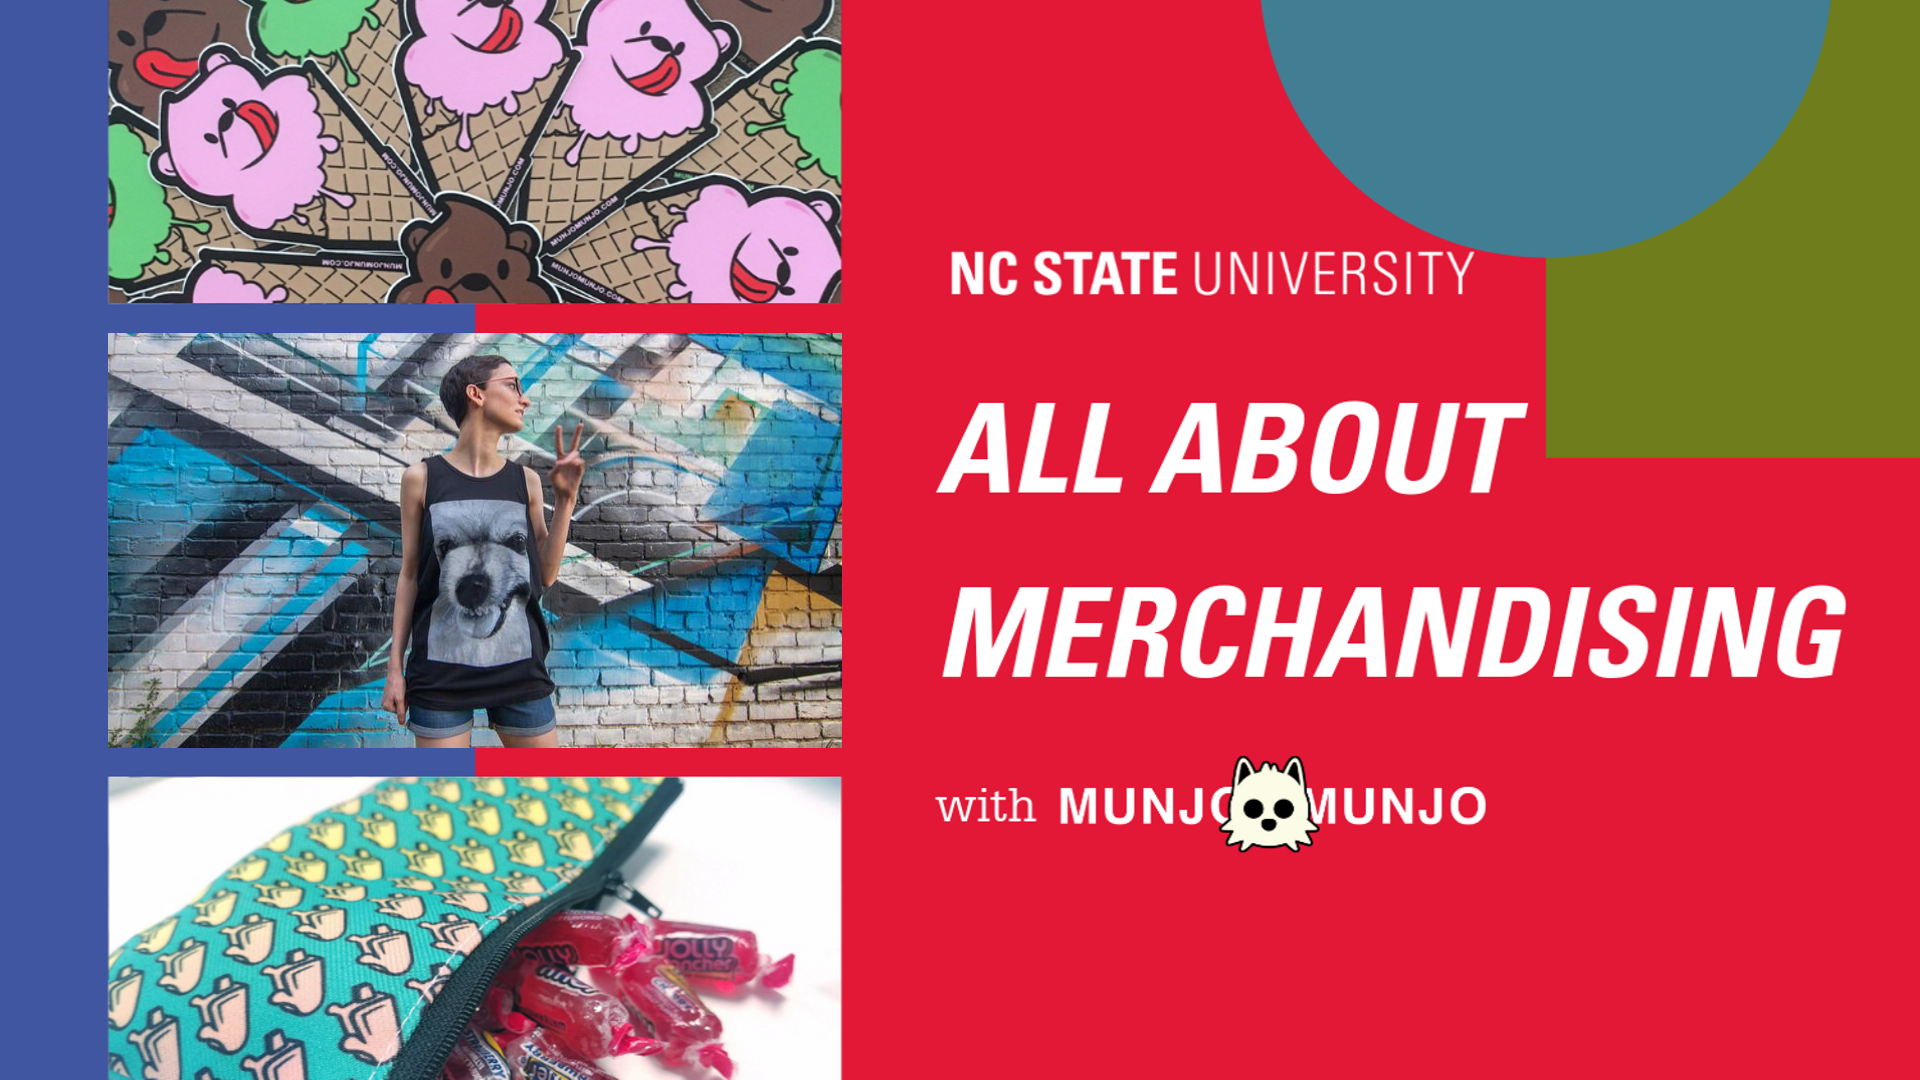 NC State University - All About Merchandising with Munjo Munjo